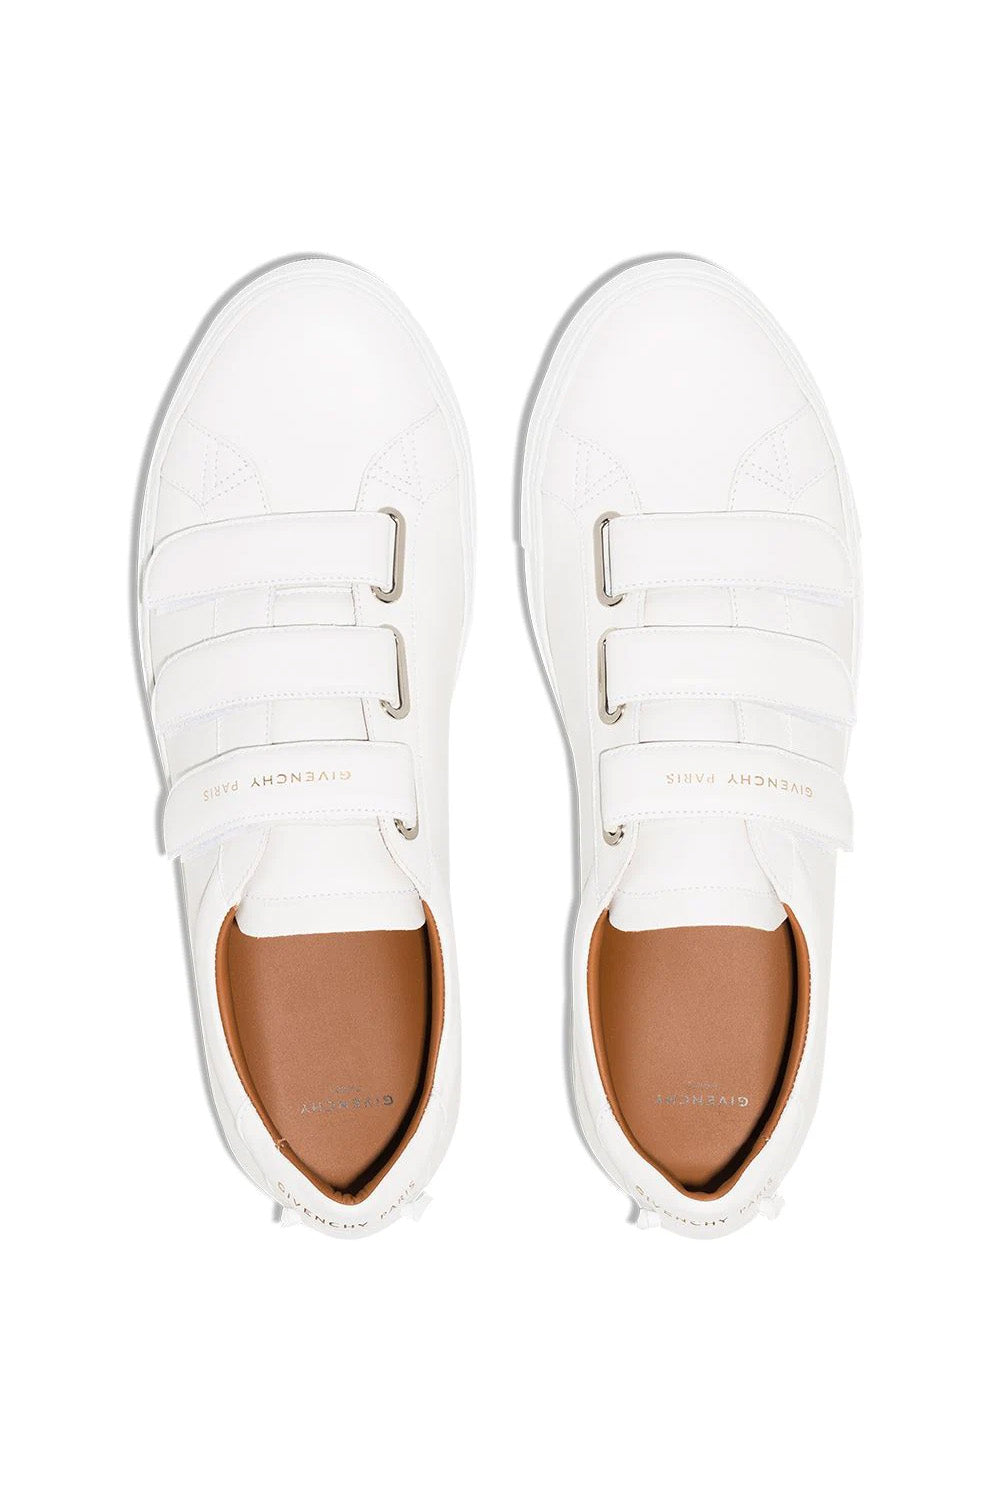 Givenchy Urban Street velcro strap sneakers